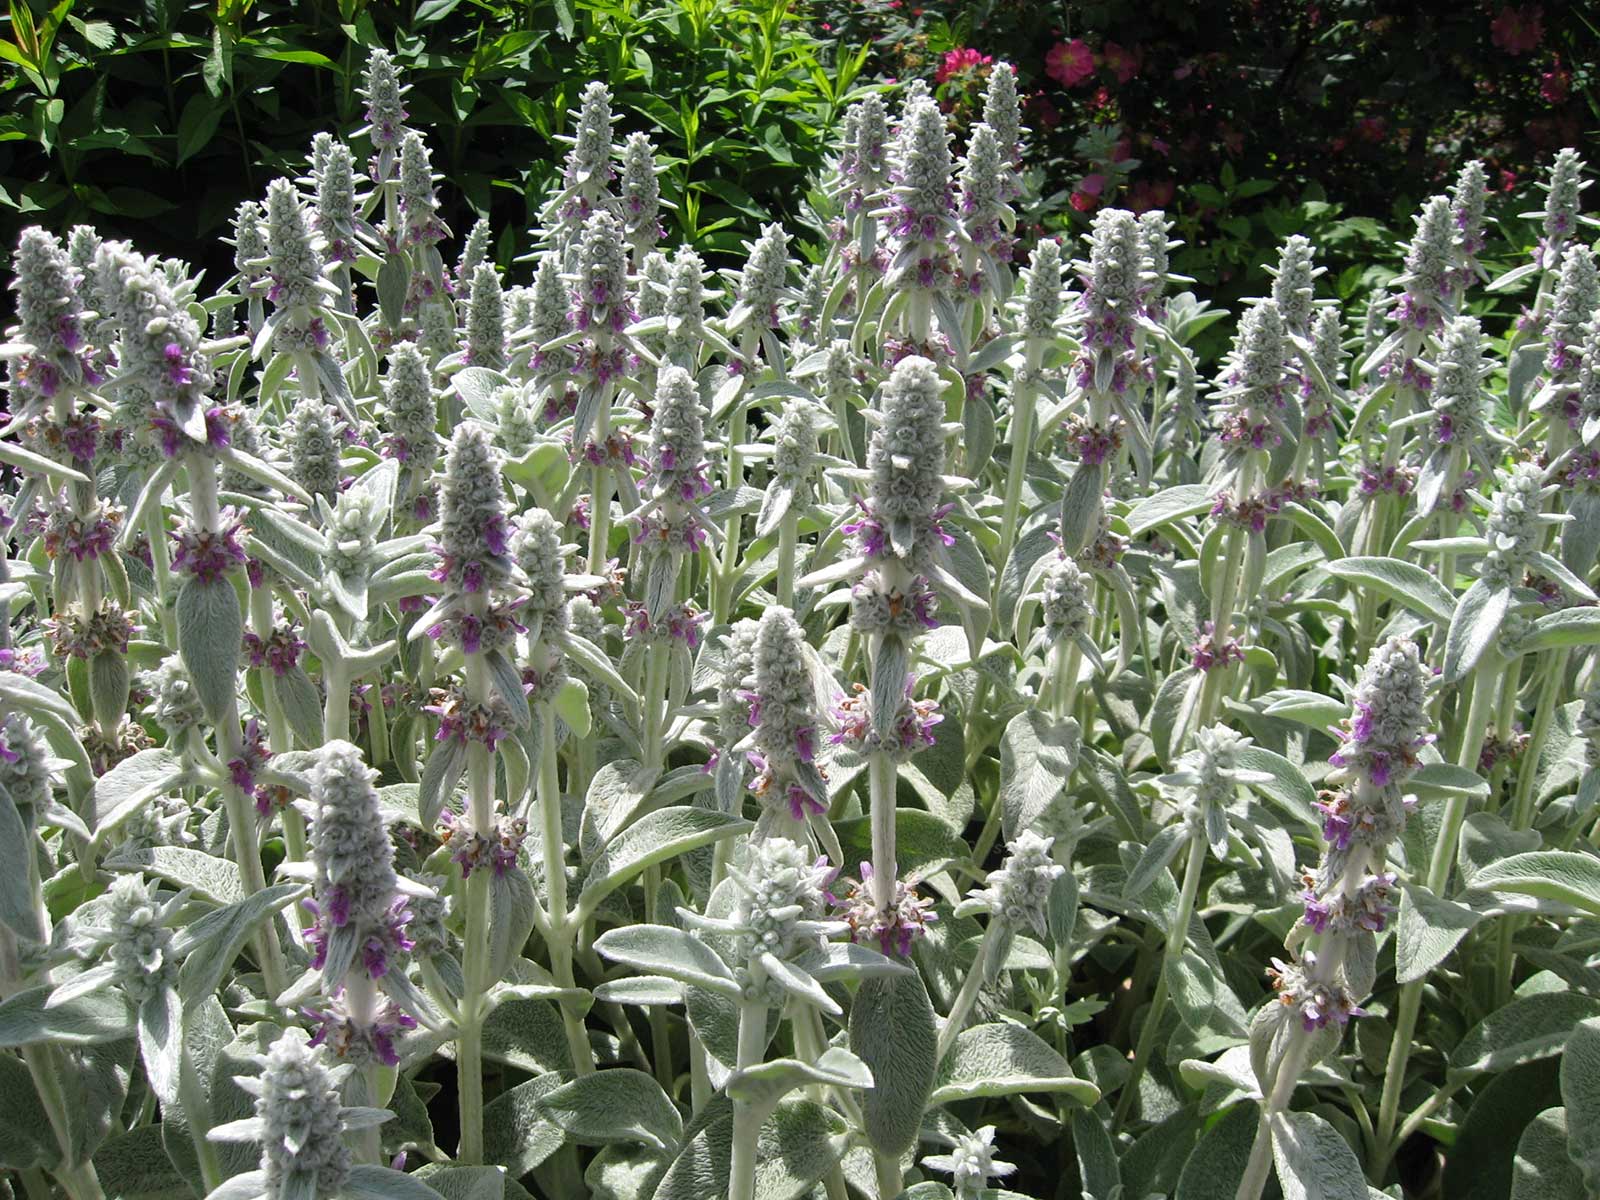 lamb's ear plants are tolerant enough to grow almost anywhere. The plant should be grown in full sun or partial shade. Although lamb's ear can tolerate the poorest of soils, it should always be well-draining as the plant dislikes overly moist soil. This is especially true of shady areas.